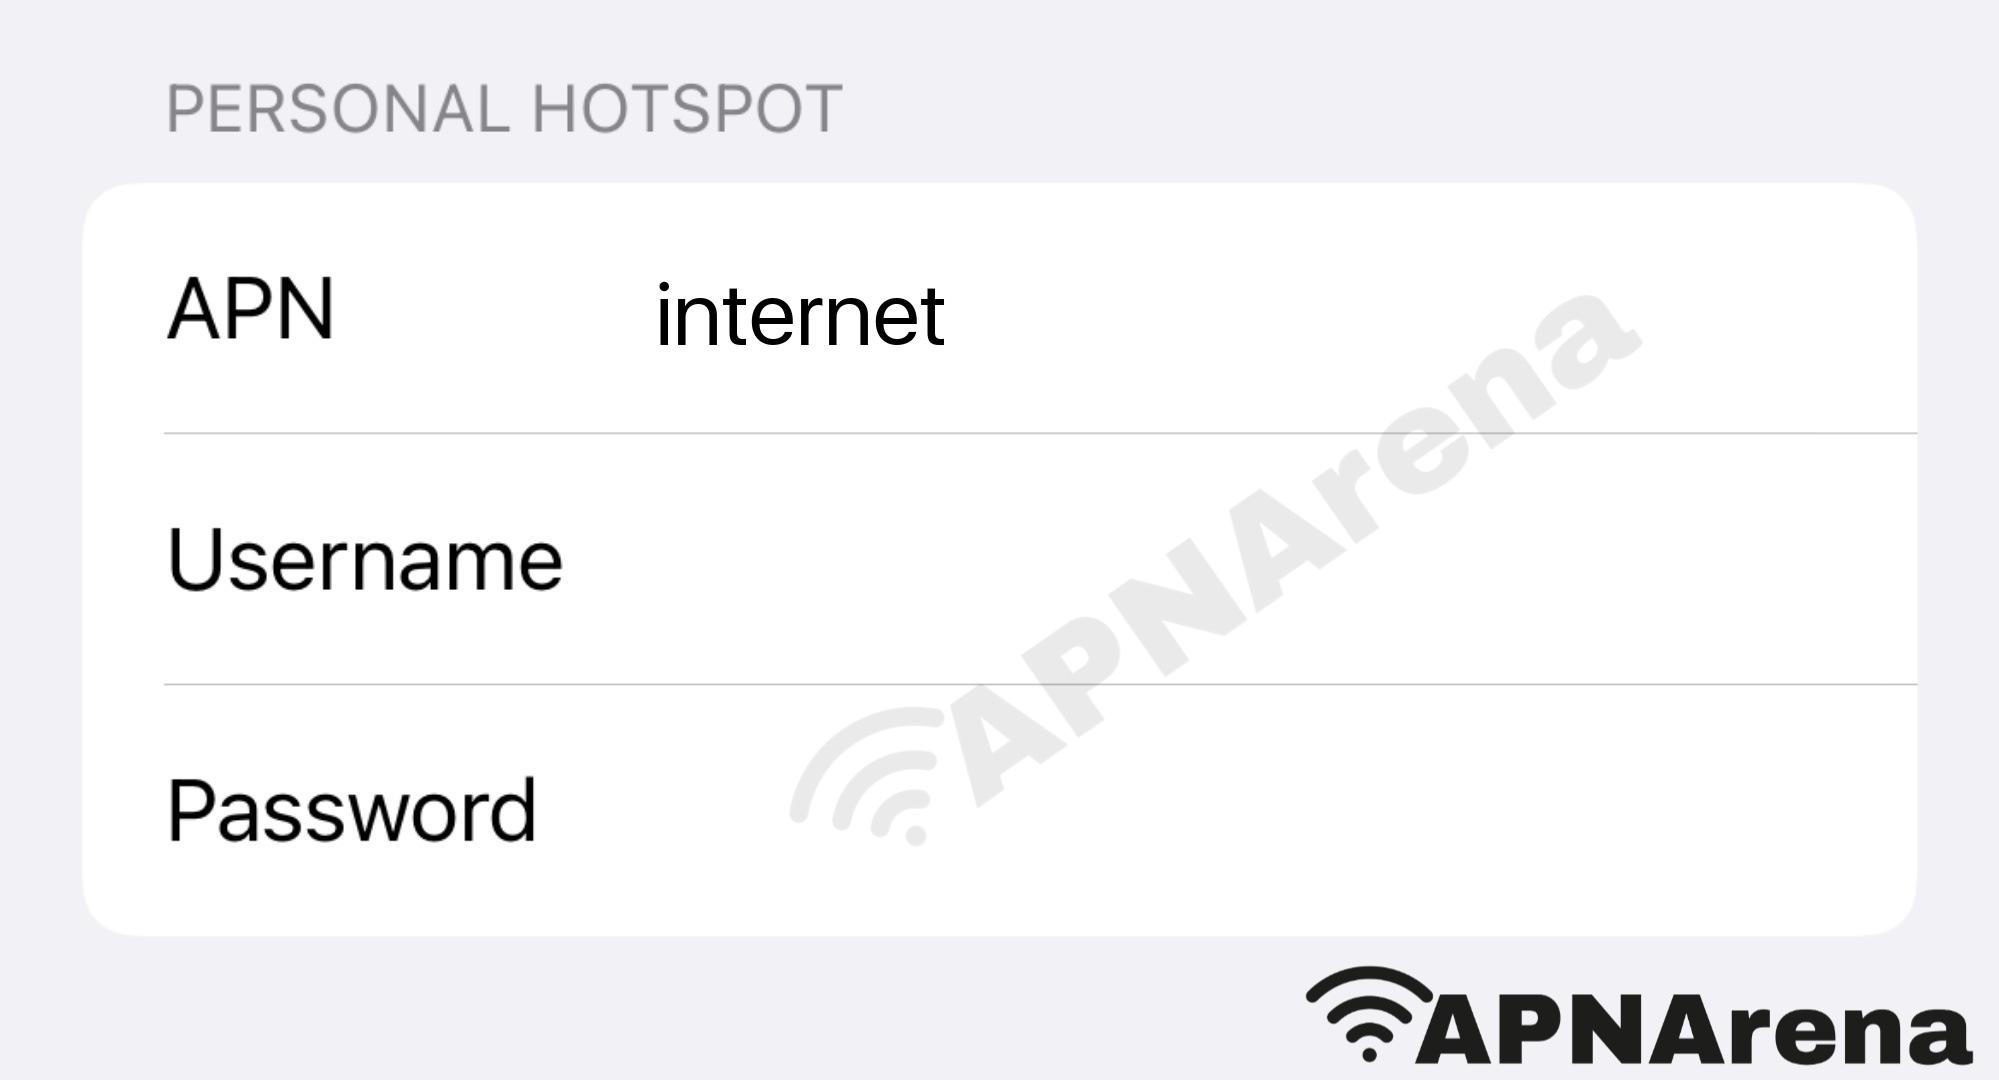 Telefonia Mobile Sammarinese (TMS) Personal Hotspot Settings for iPhone